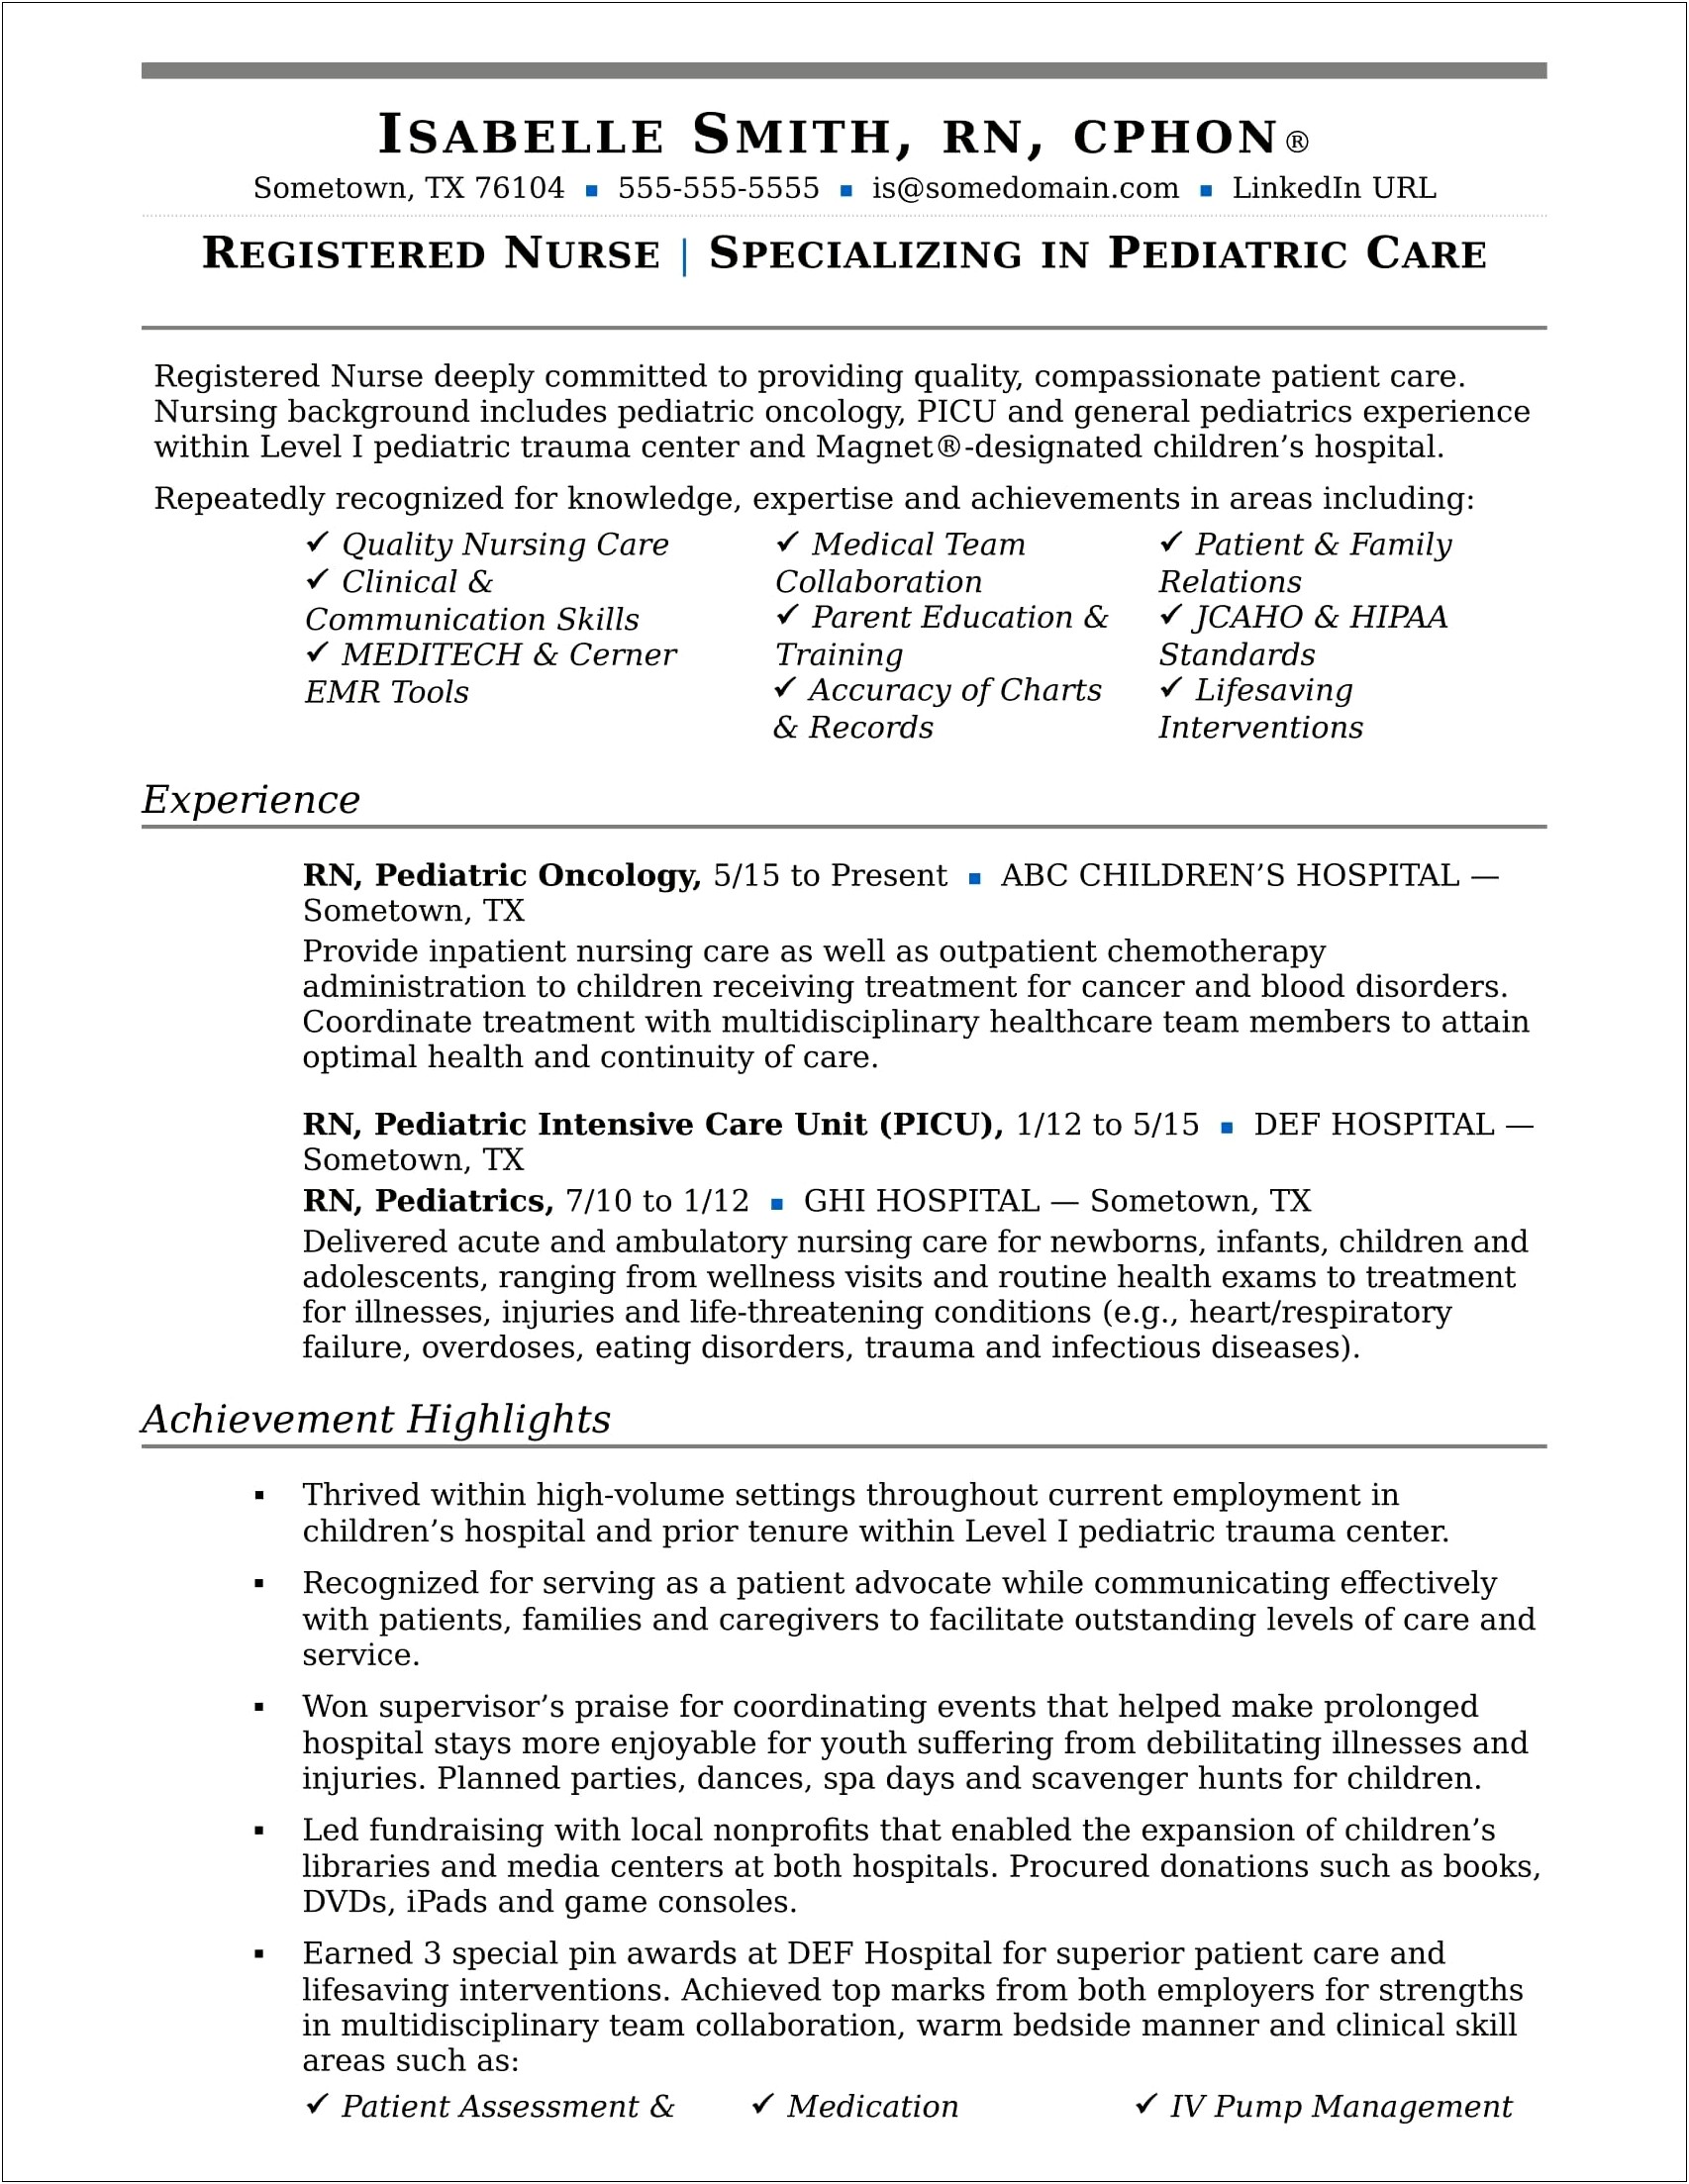 We Have Received Your Resume Template